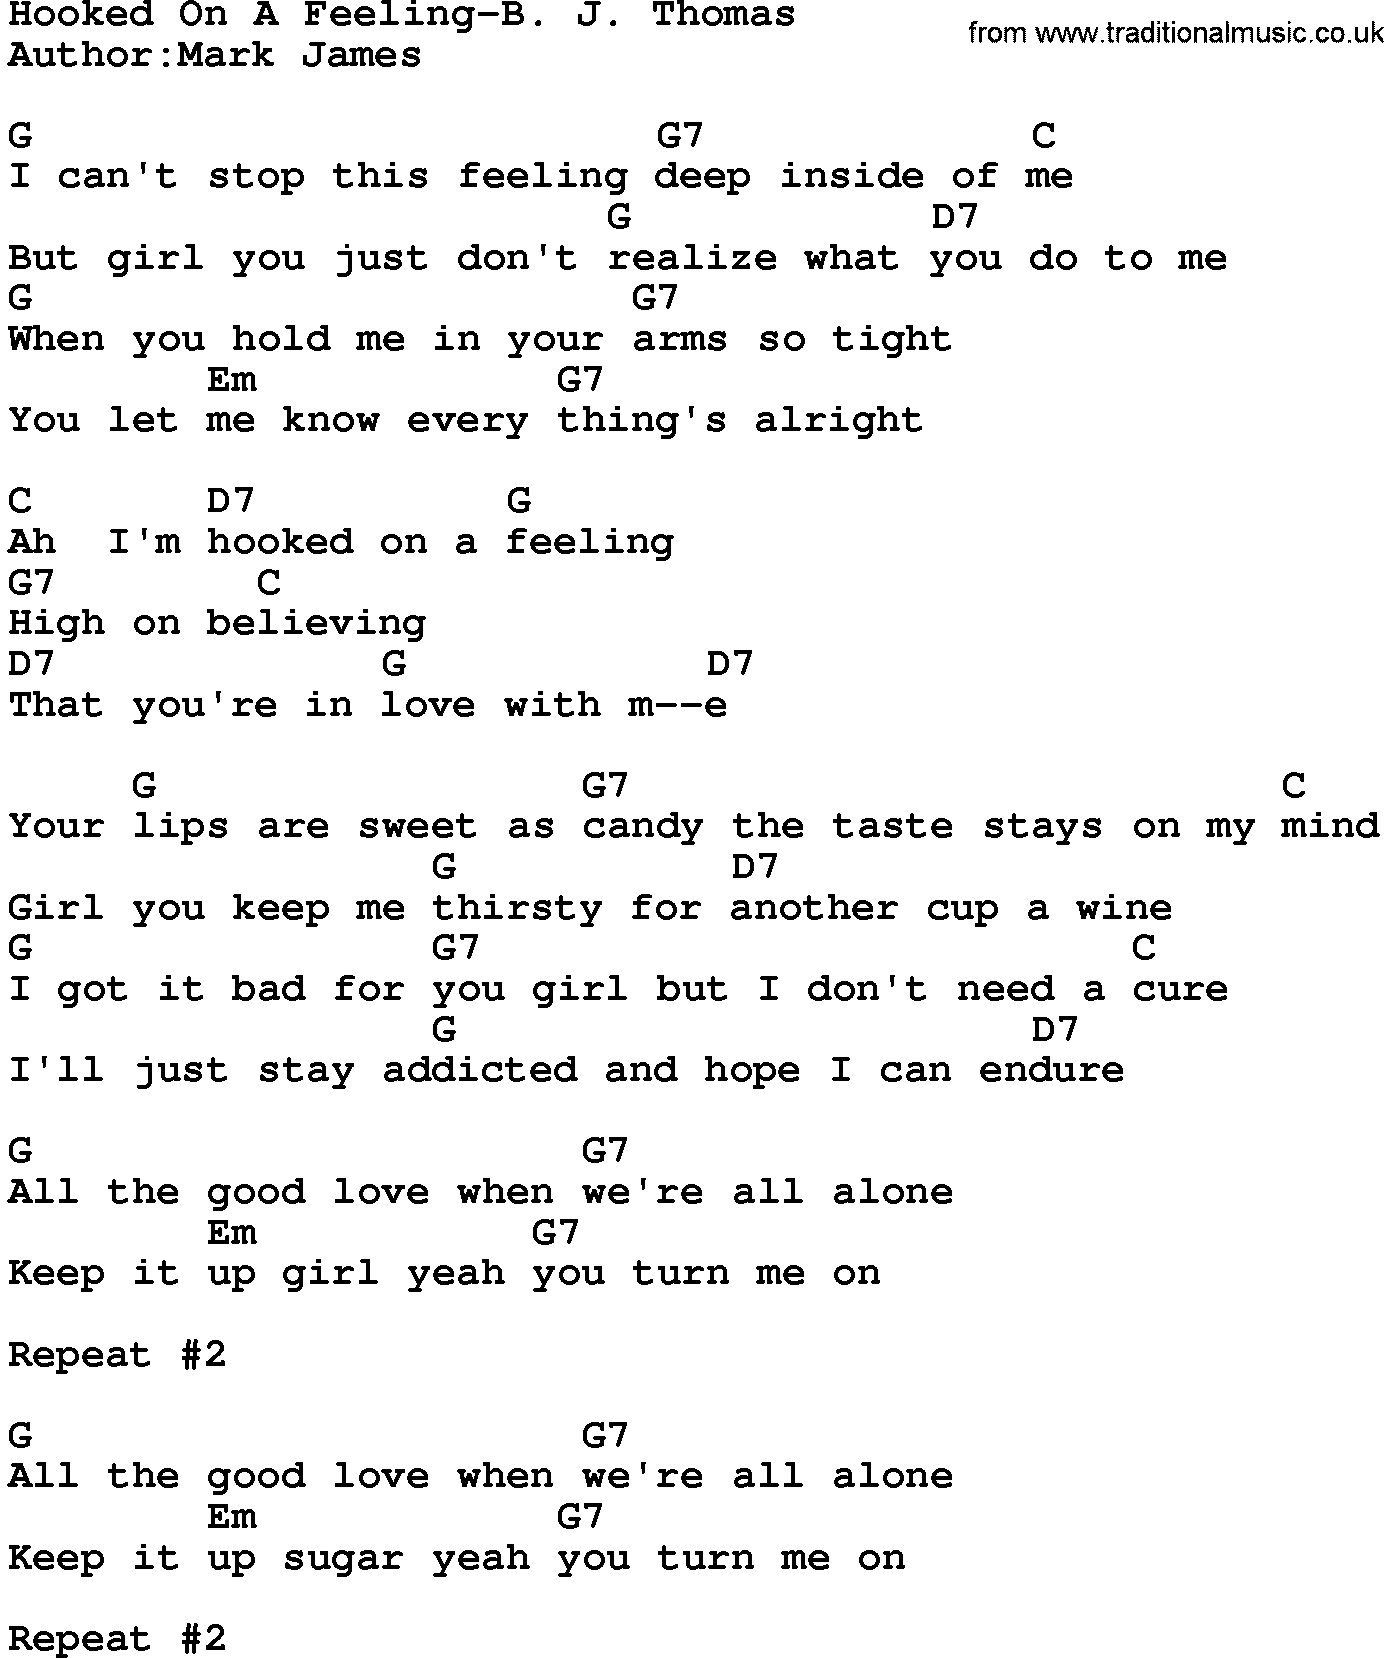 Country music song: Hooked On A Feeling-B J Thomas lyrics and chords